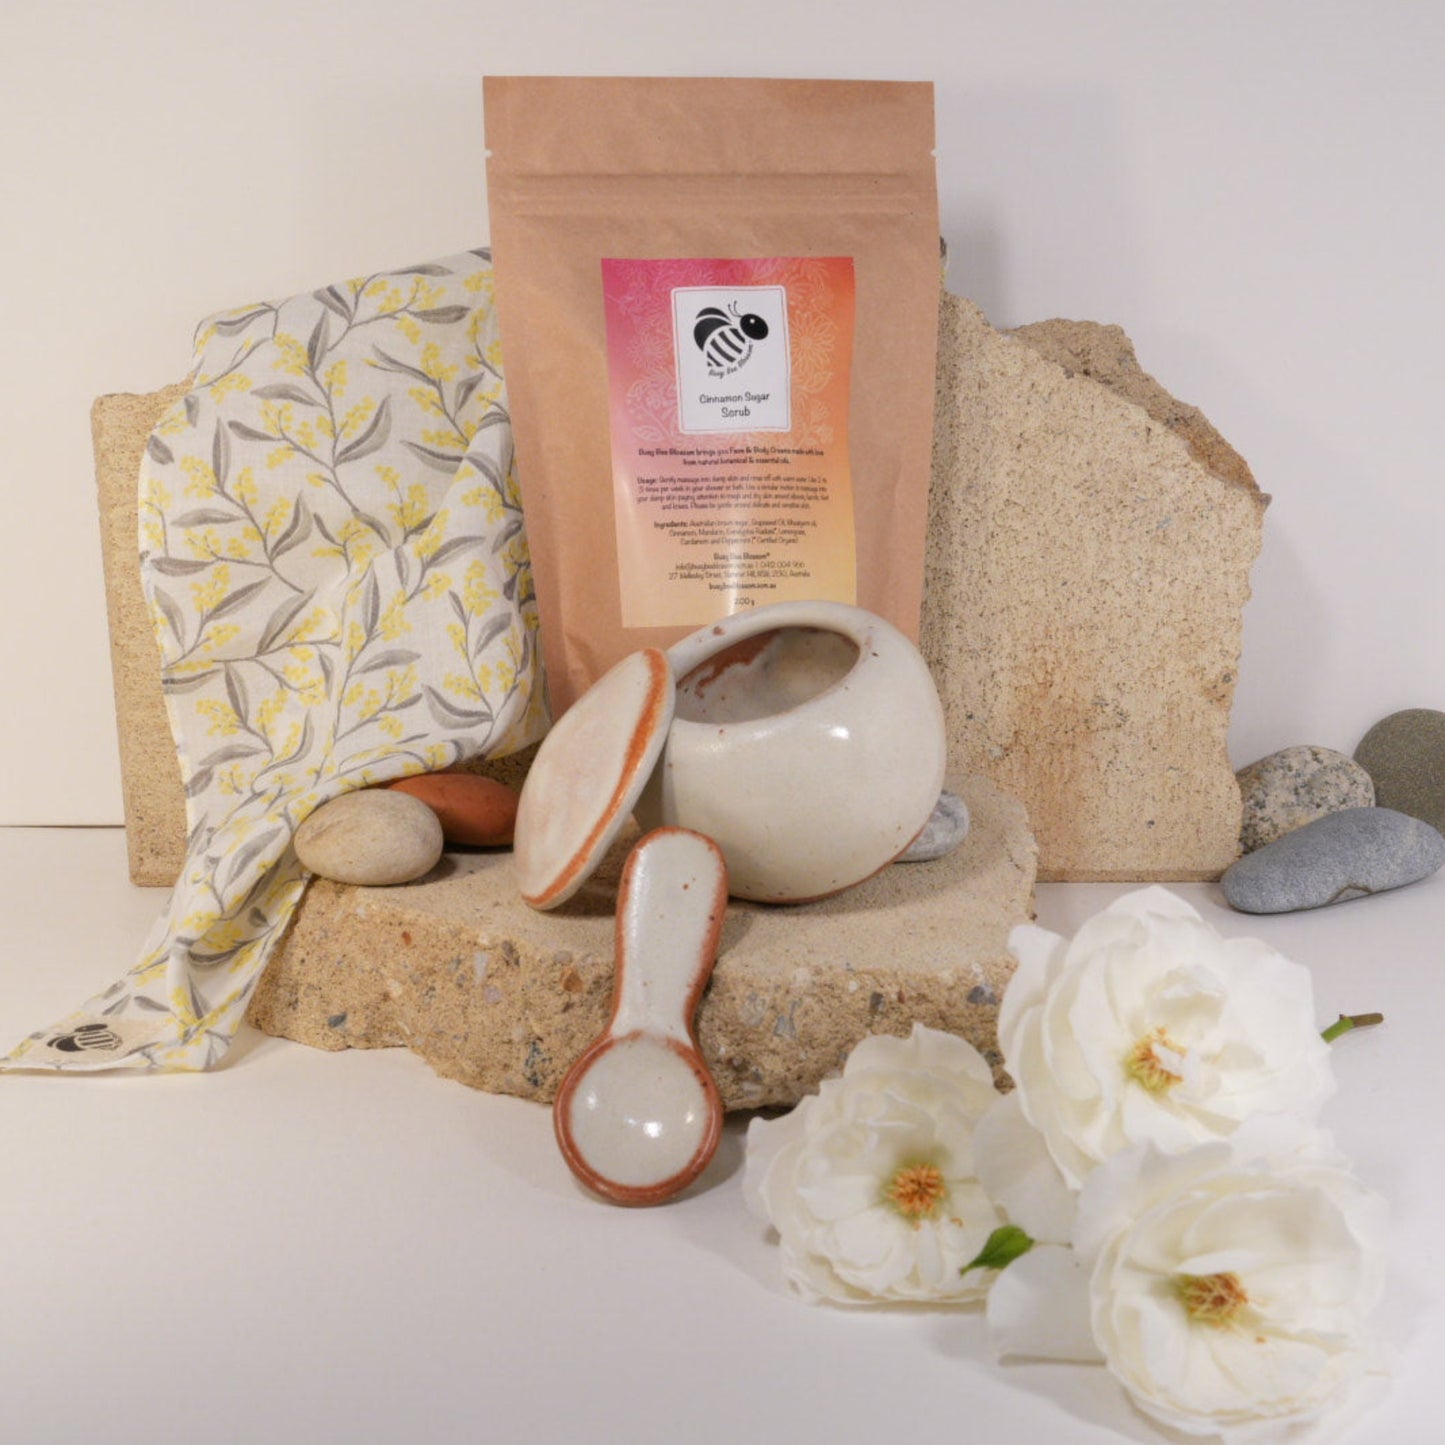 Spoonful of Sugar Gift Set contains Body scrub, ceramic bowl, spoon and muslin face cloth.